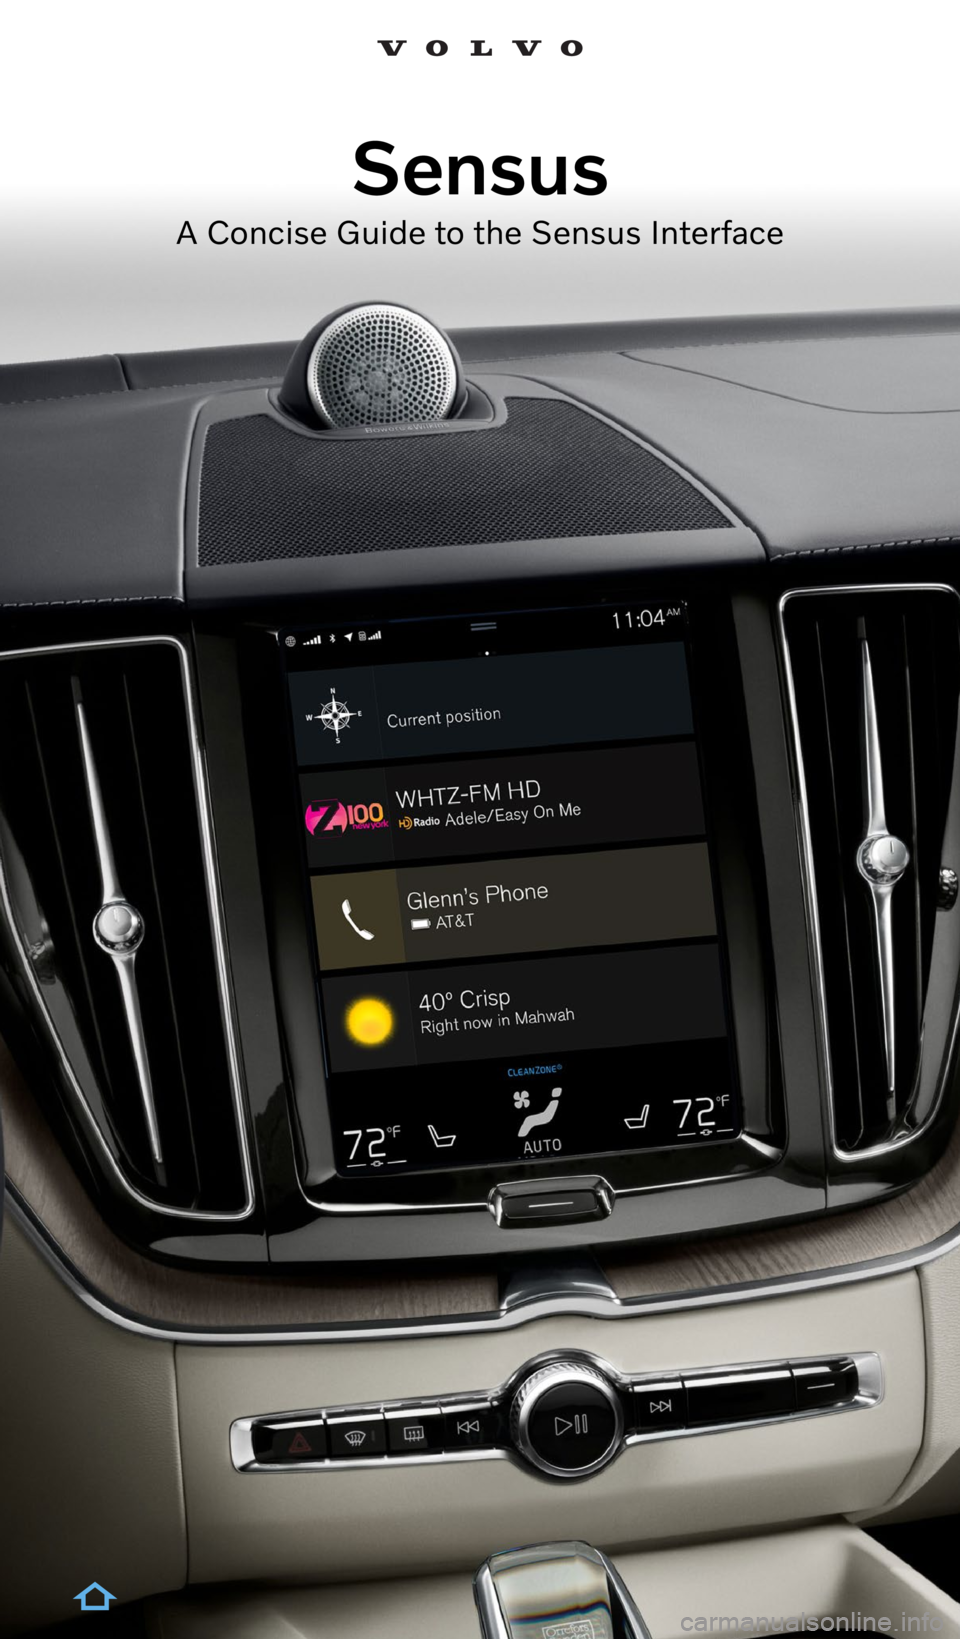 VOLVO V60 CROSS COUNTRY 2022  Sensus Digital Guide Sensus
A Concise Guide to the Sensus Interface  